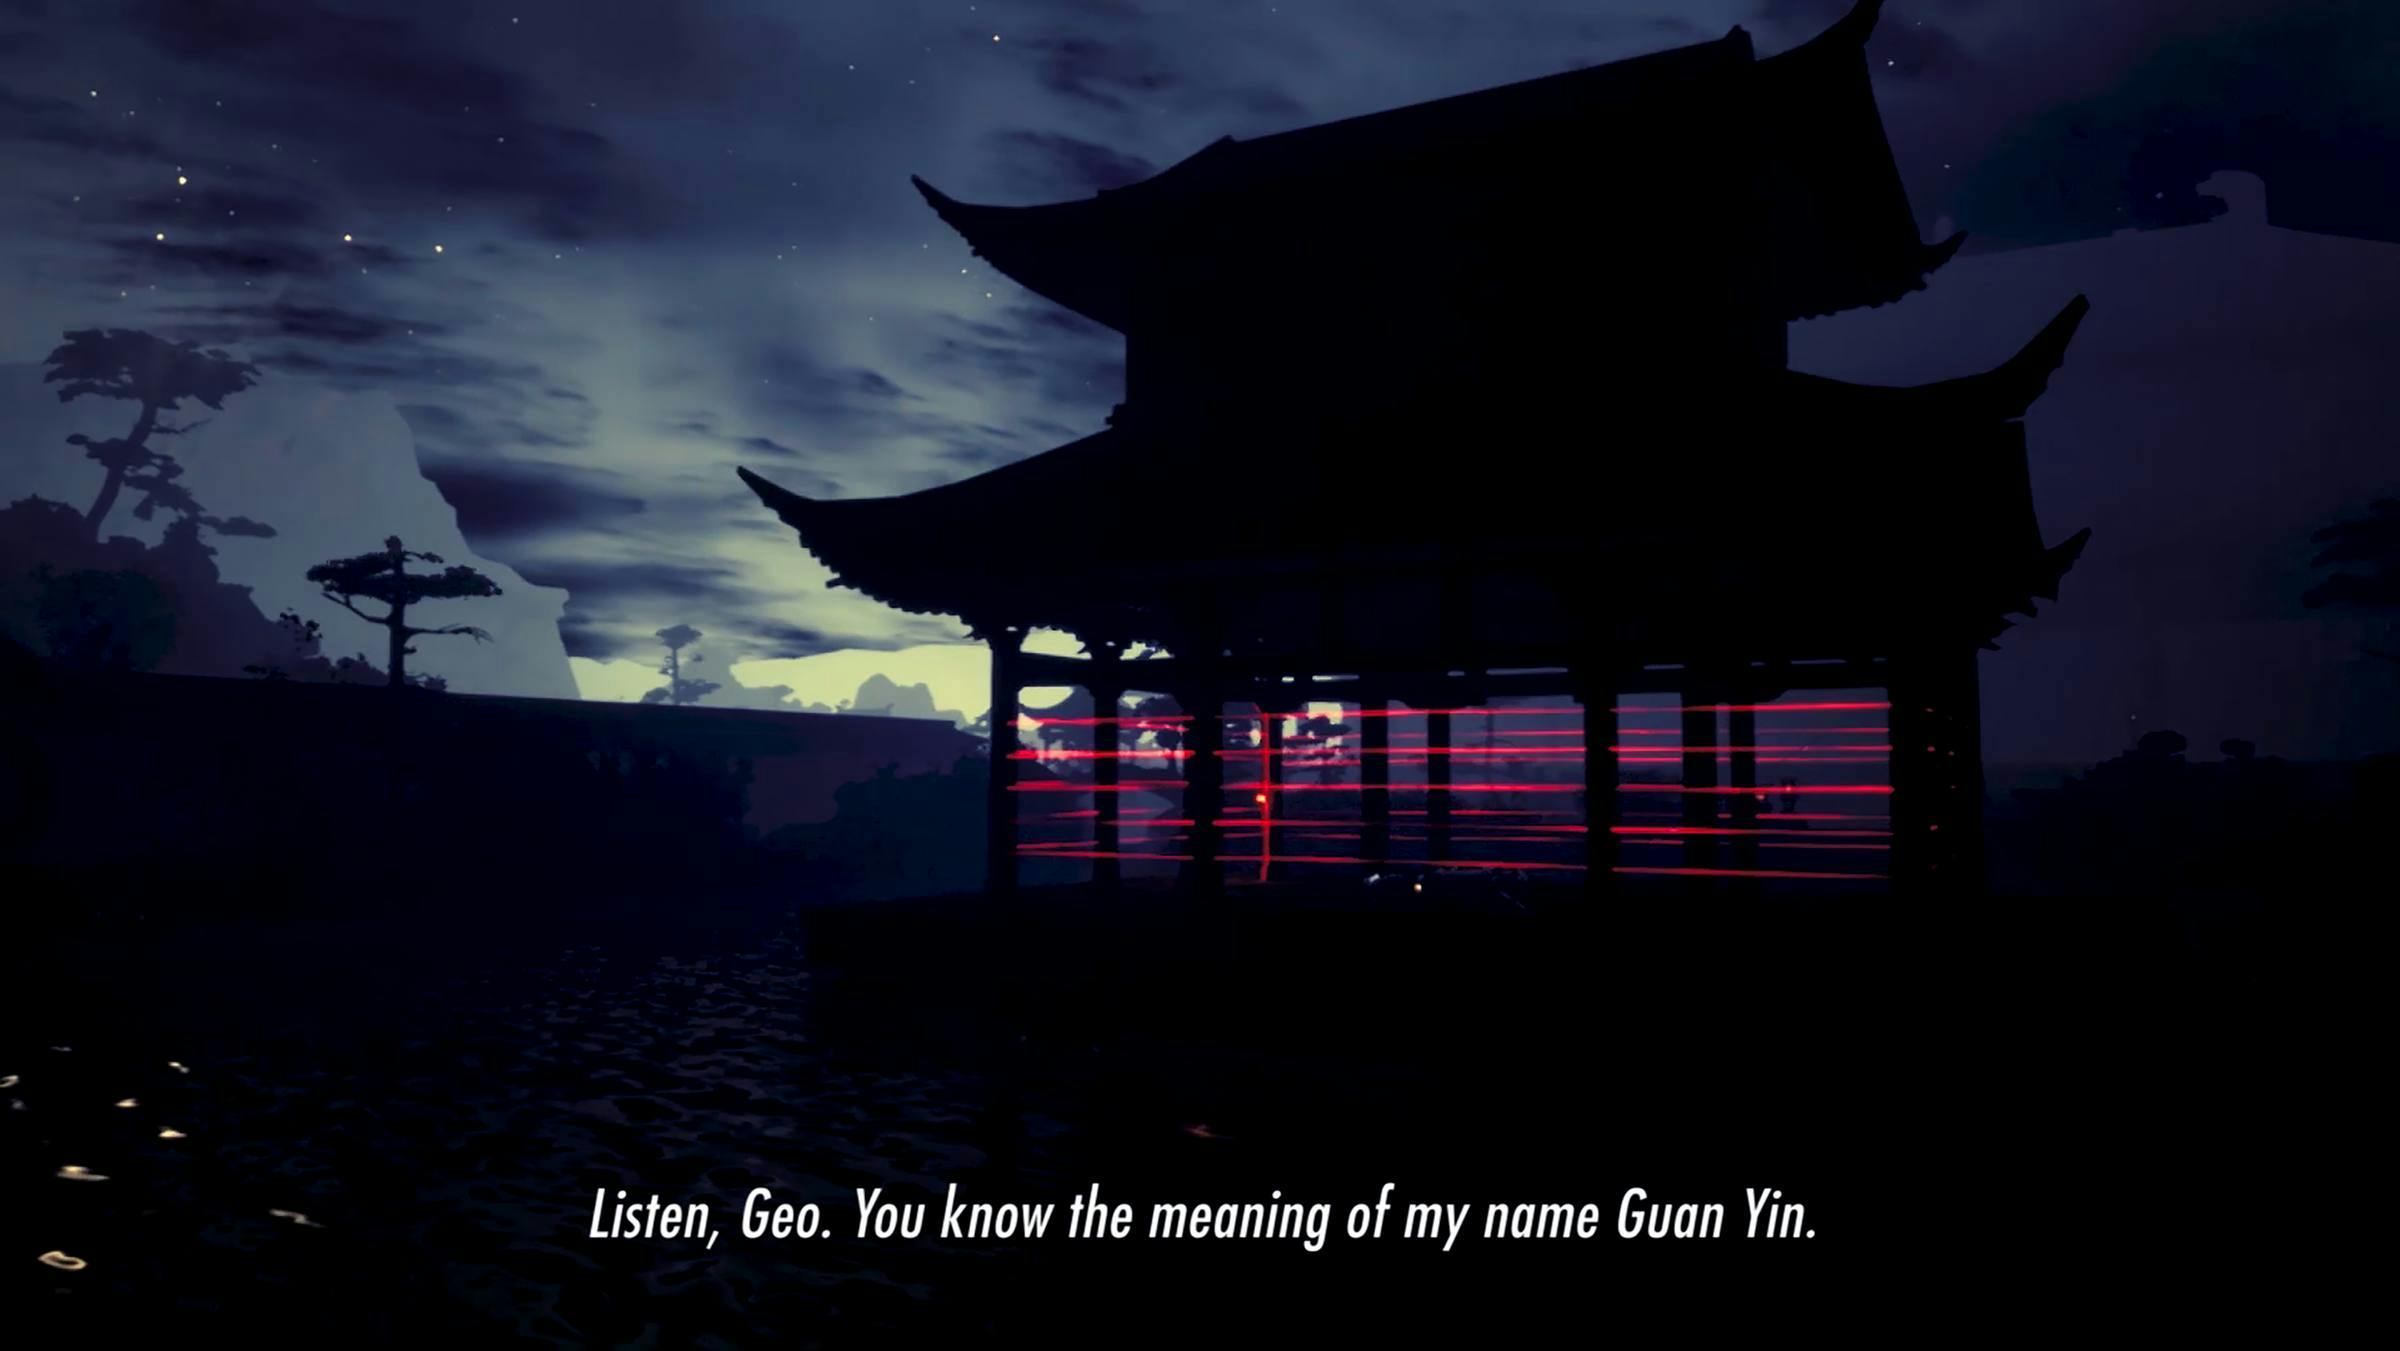 Image of a building where the ground floor level is made up of red lazers lines. The building has an ornate roof. The words 'Listen, Geo. You know the meaning of my name Guan Yin.'